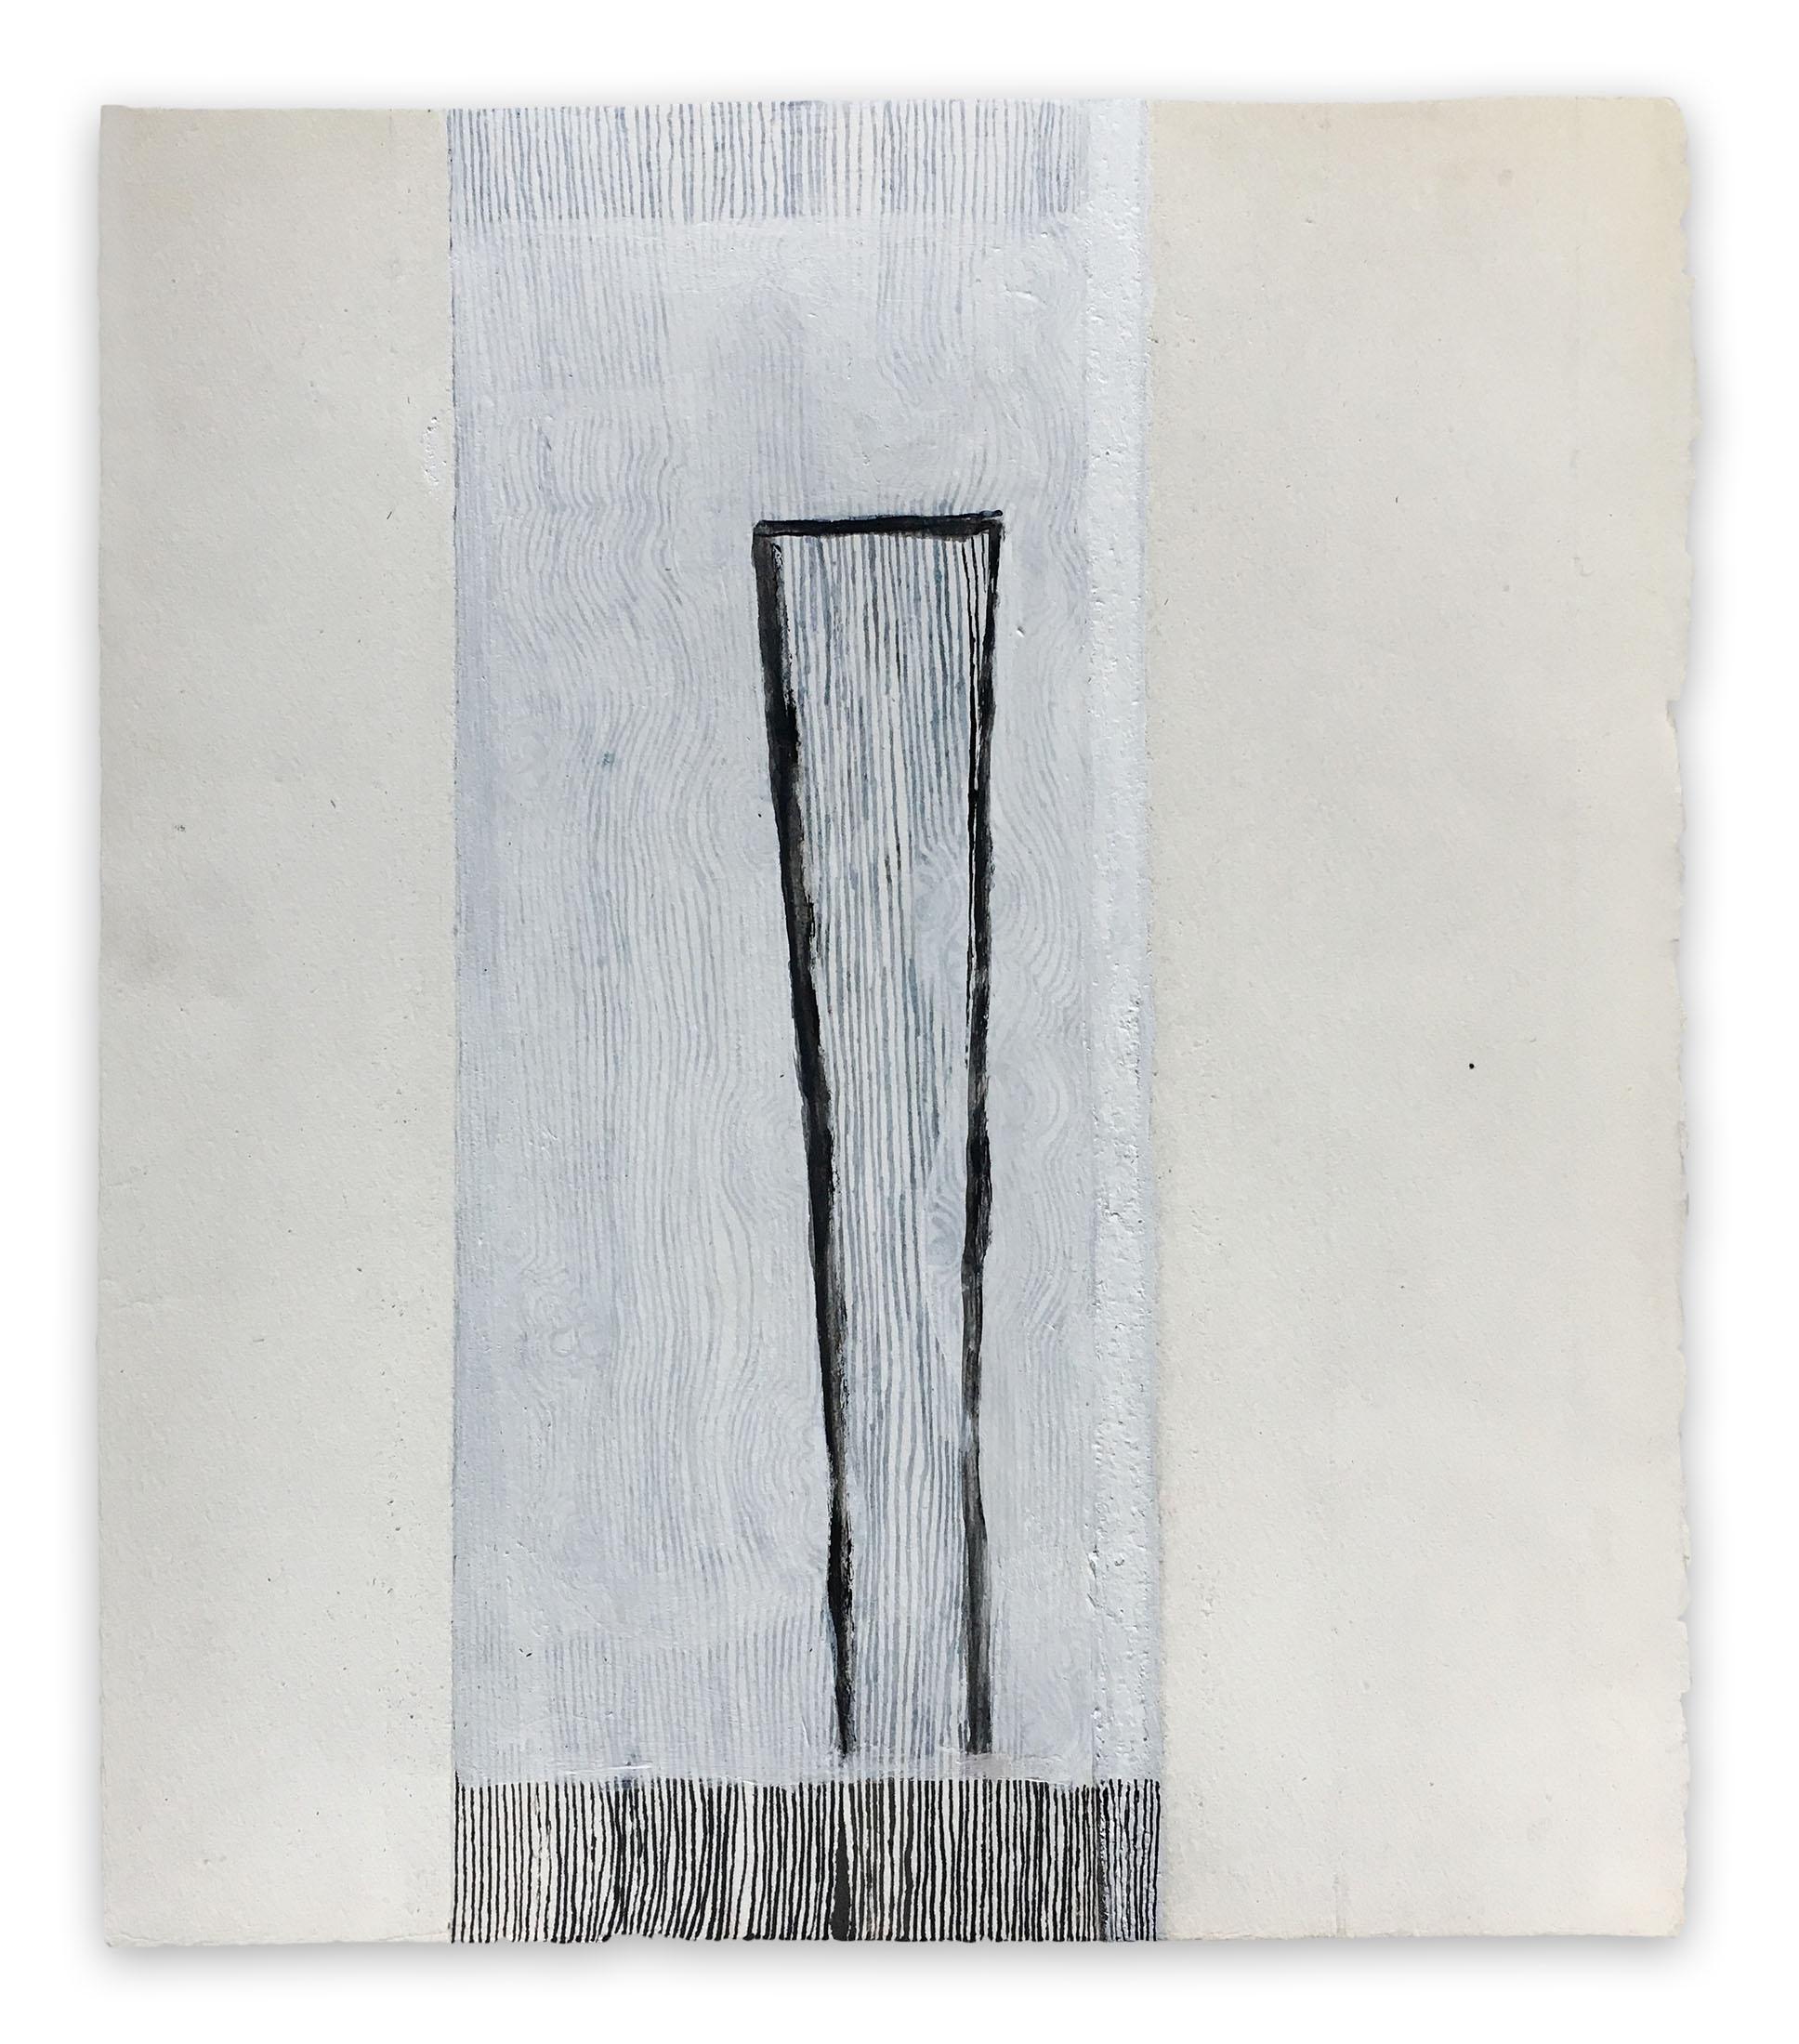 Untitled 2012 (Abstract Painting)

Ink and acrylic on paper - Unframed.

In her abstract drawings, collages and paintings, Fieroza Doorsen brings to life the tensions and harmonies that emerge when structure meets intuition. Her visual language